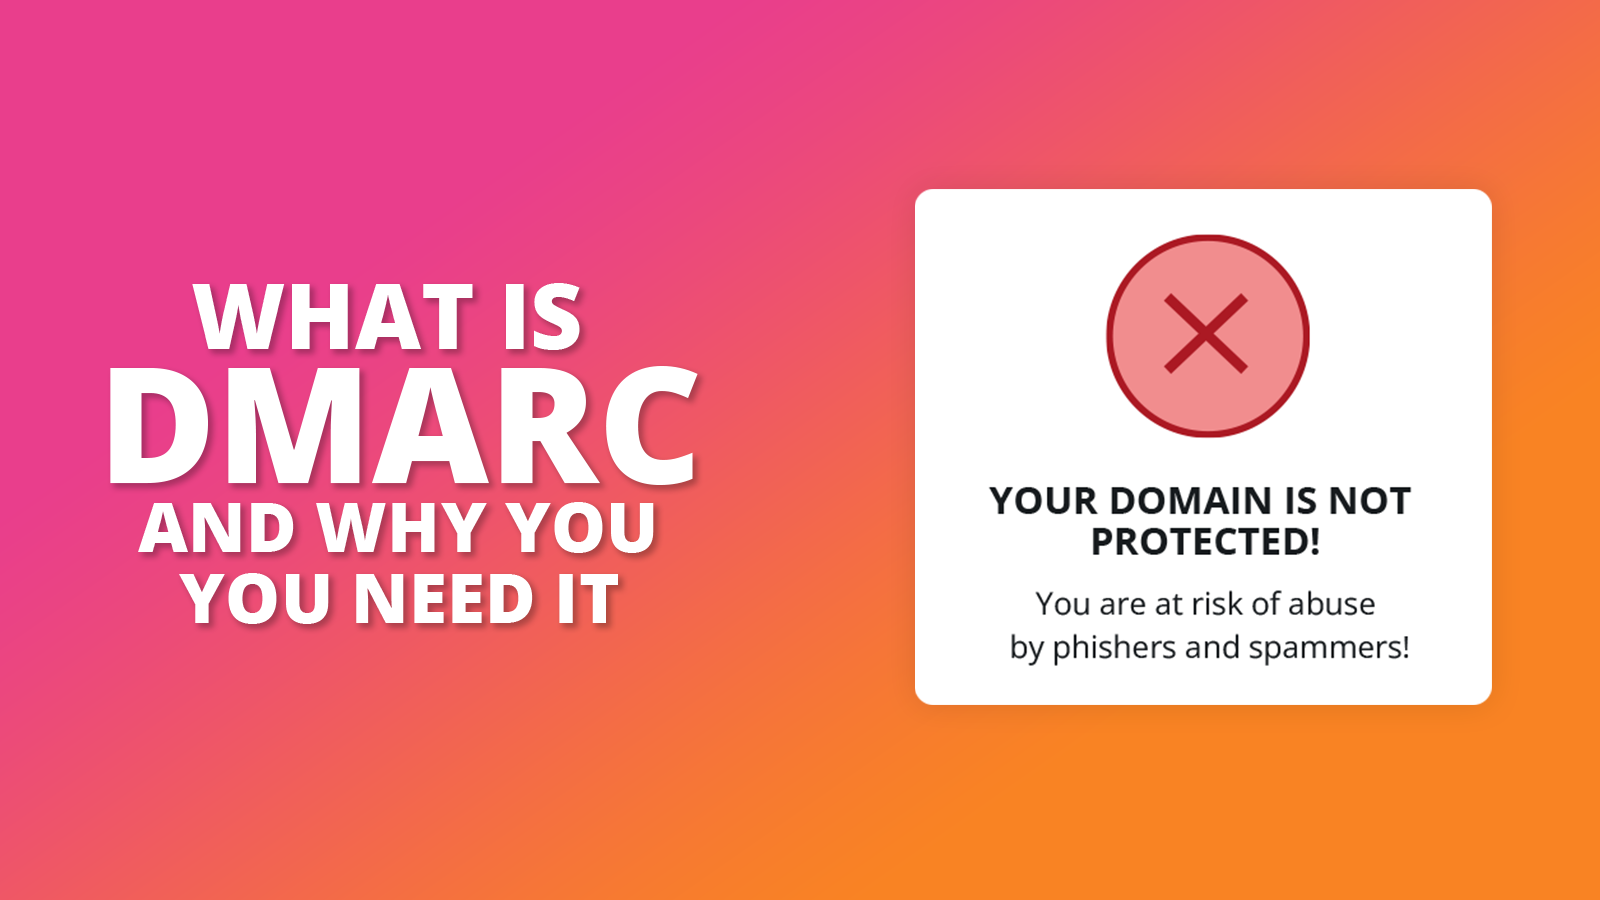 DMARC: What it is and why you need it.